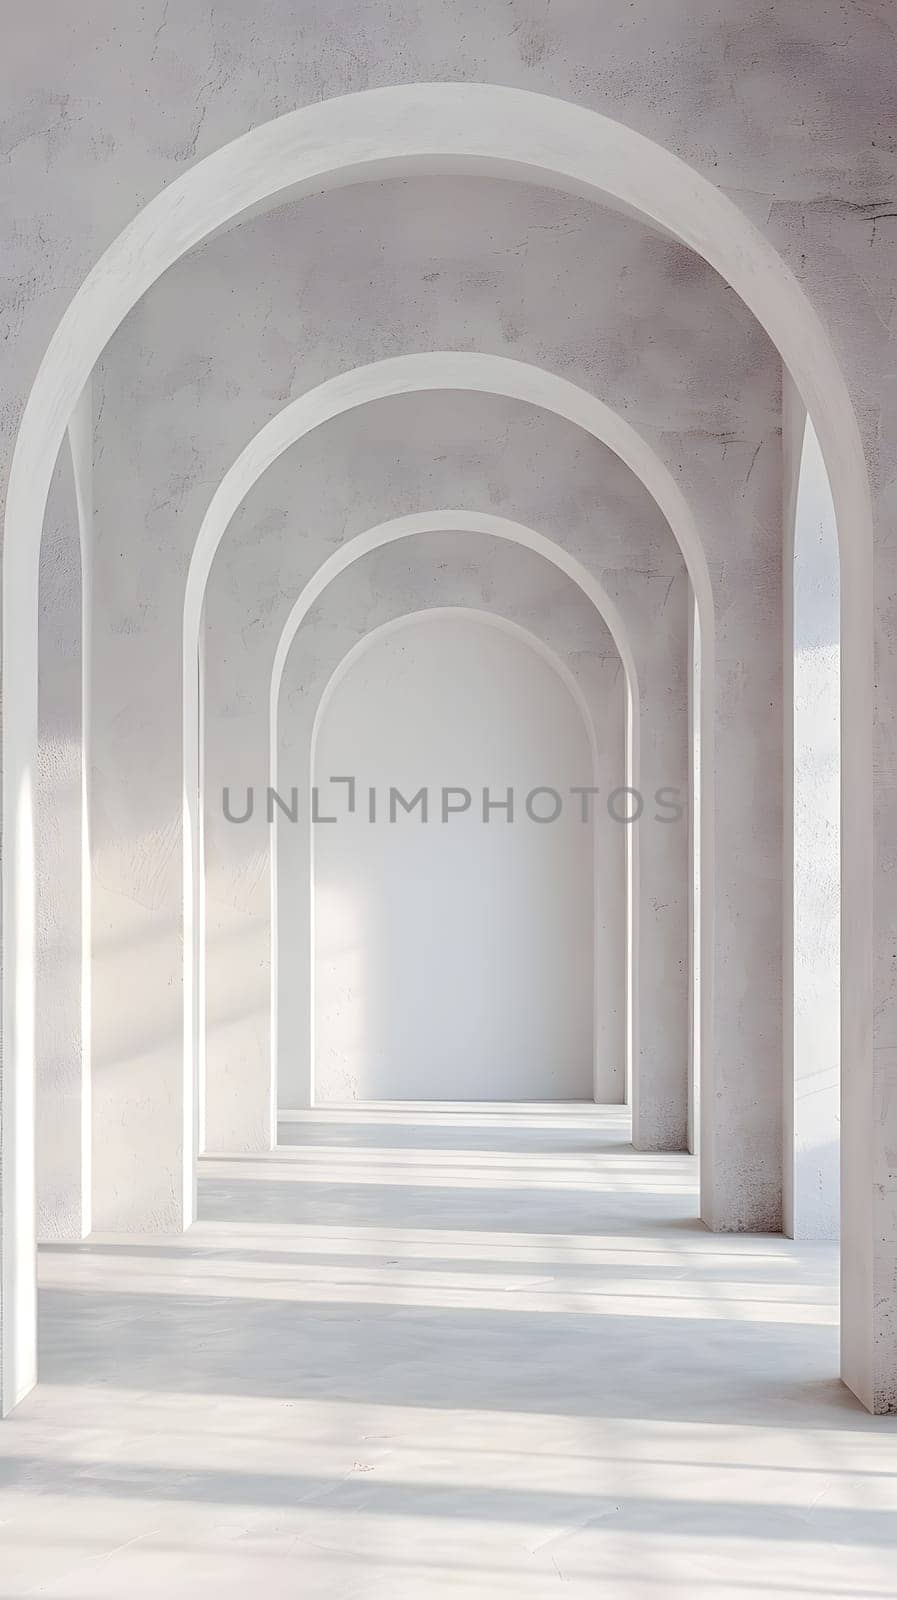 A visually striking hallway in a building featuring arches, columns, and a symmetrical design. The arcade is made of concrete with tints and shades adding to the artistic beauty